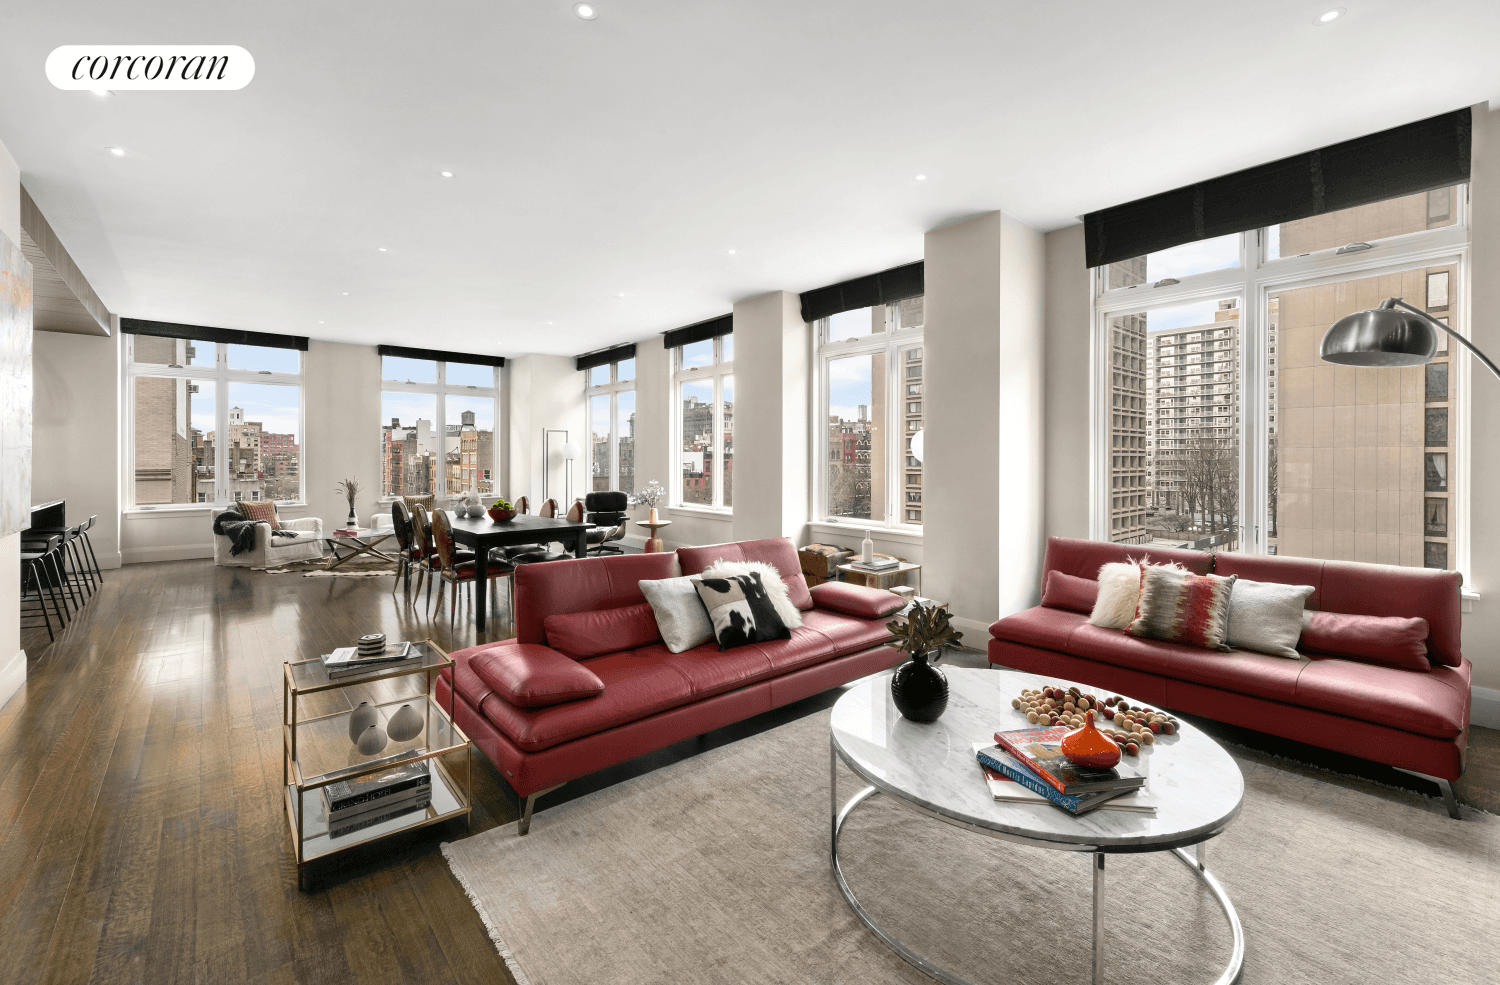 Located in one of SoHo's Premier 24 hour doorman condominiums, unit 5A at 160 Wooster Street is a dramatic corner loft fully re imagined by renowned interior designer, Shamir Shah.